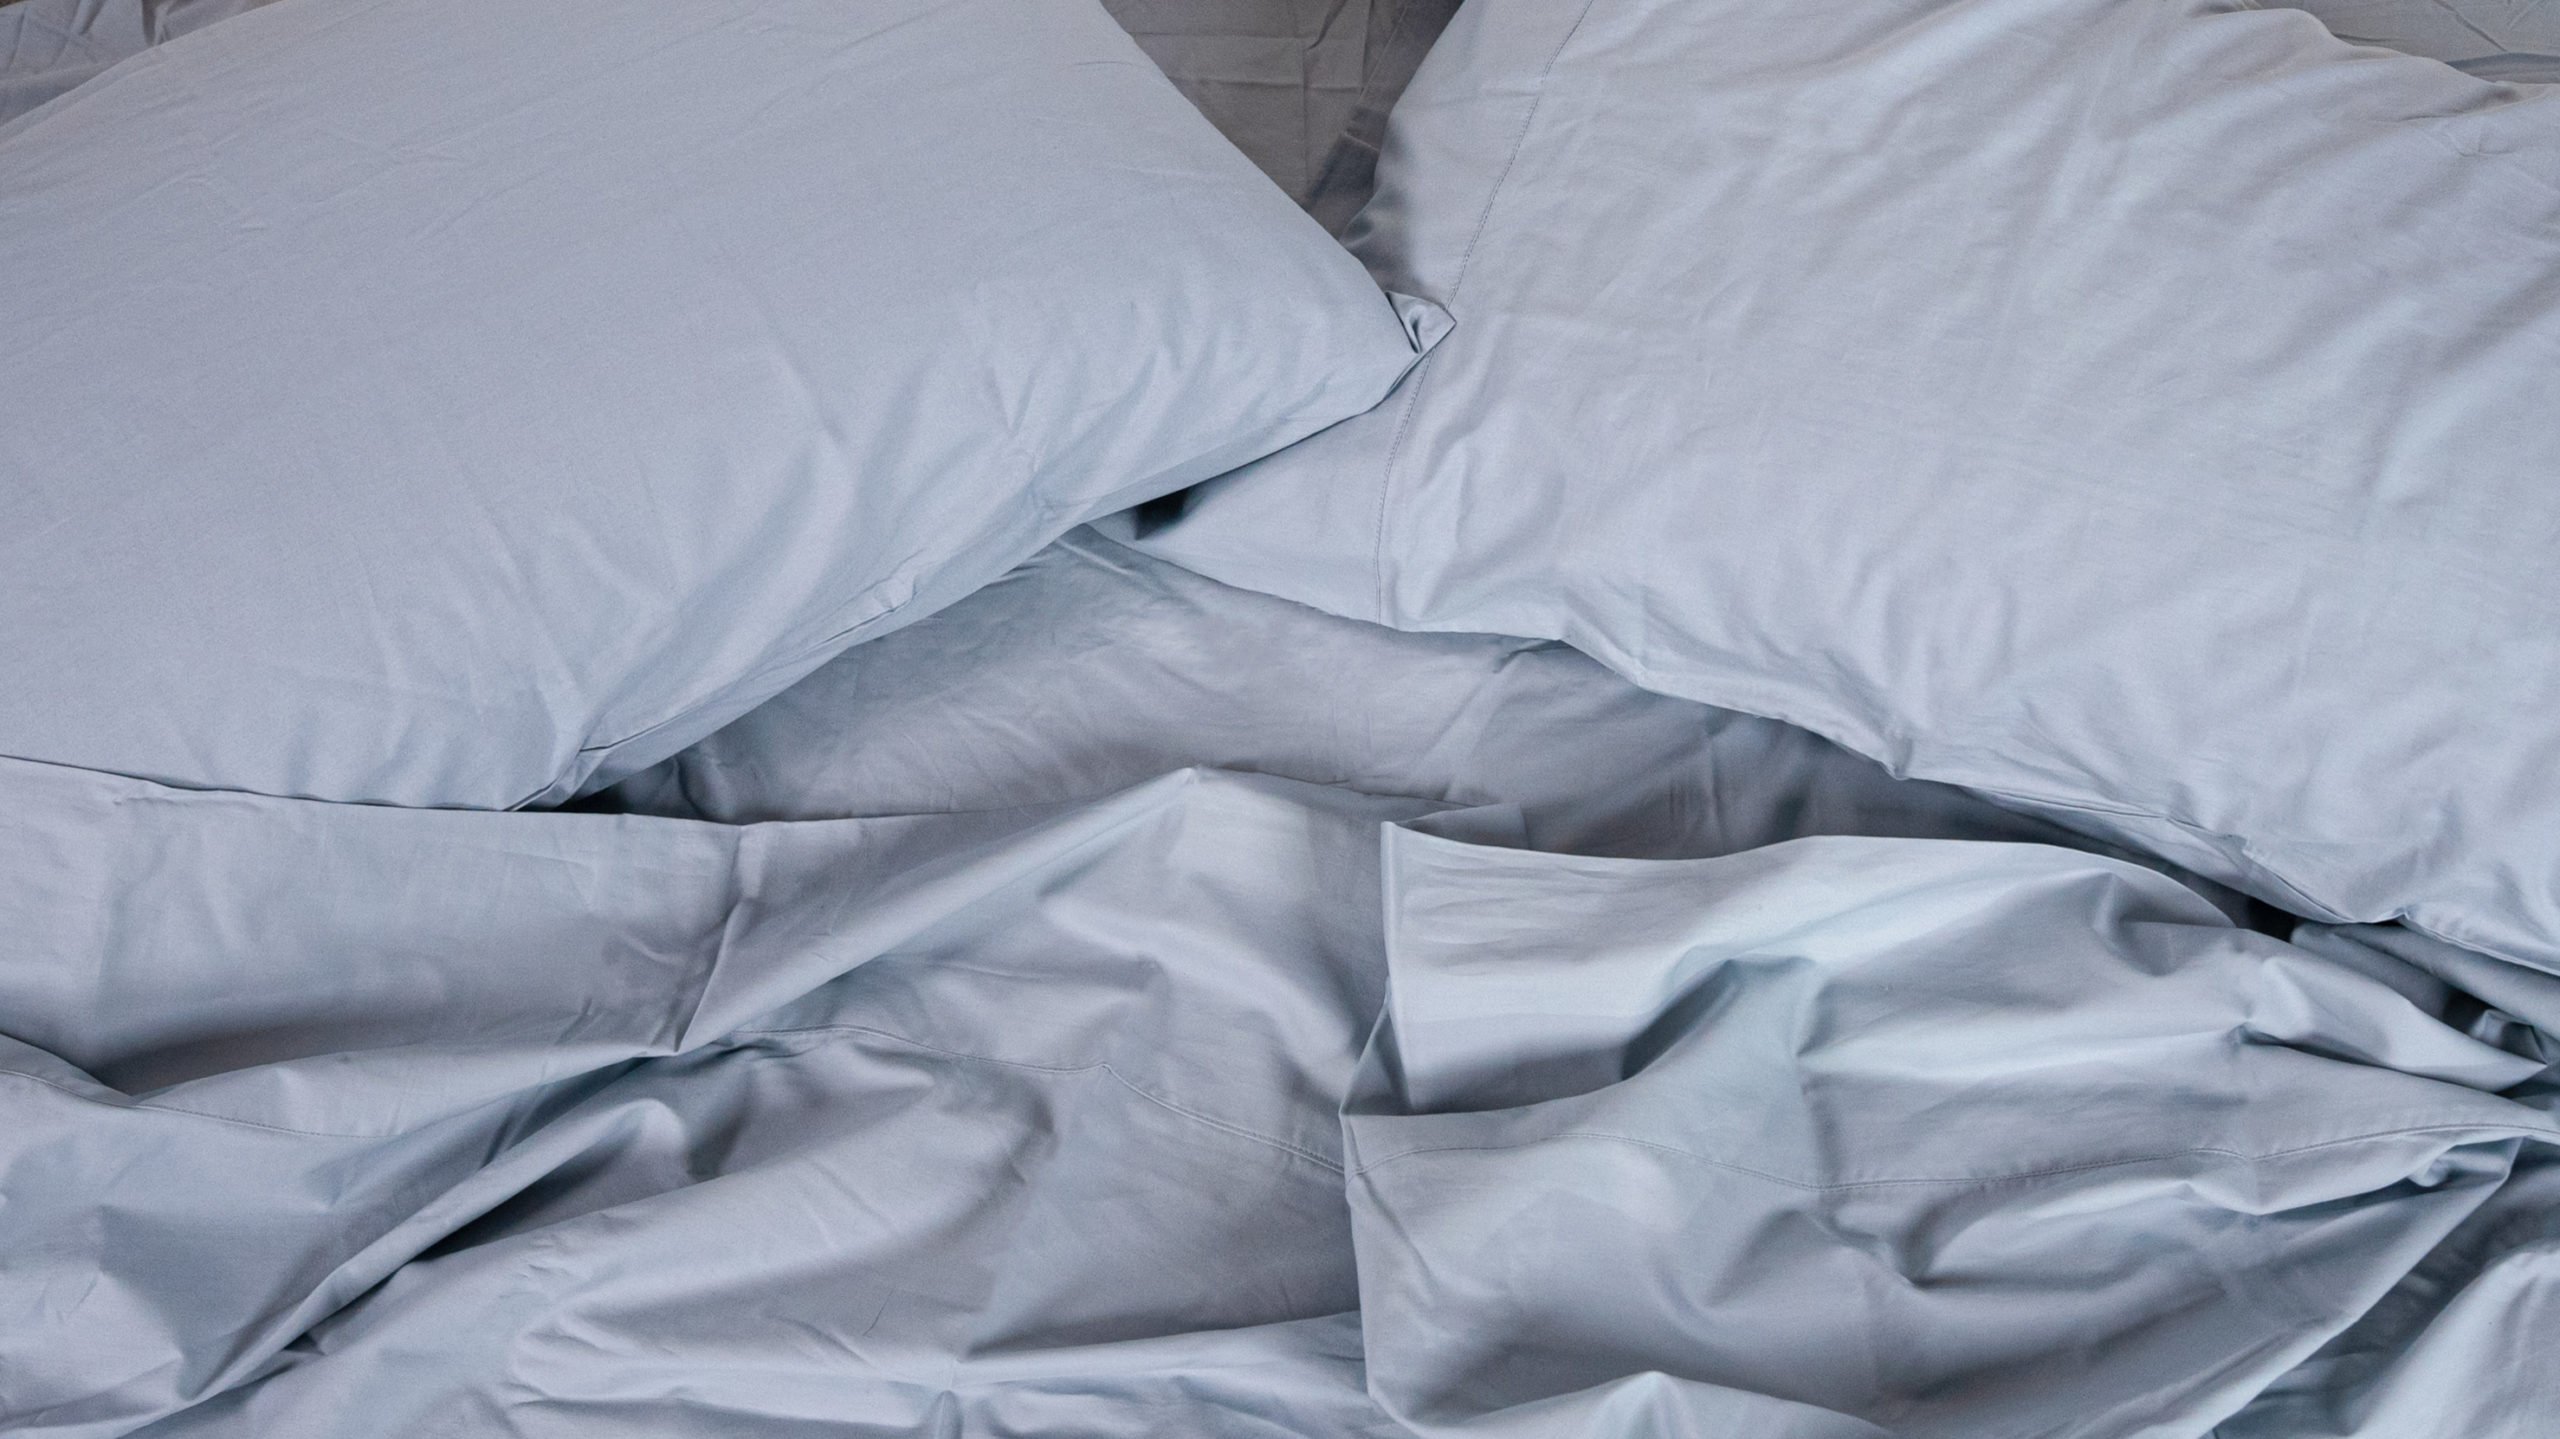 A breakdown of Microfiber Bedding Vs Cotton Bedding for new buyers